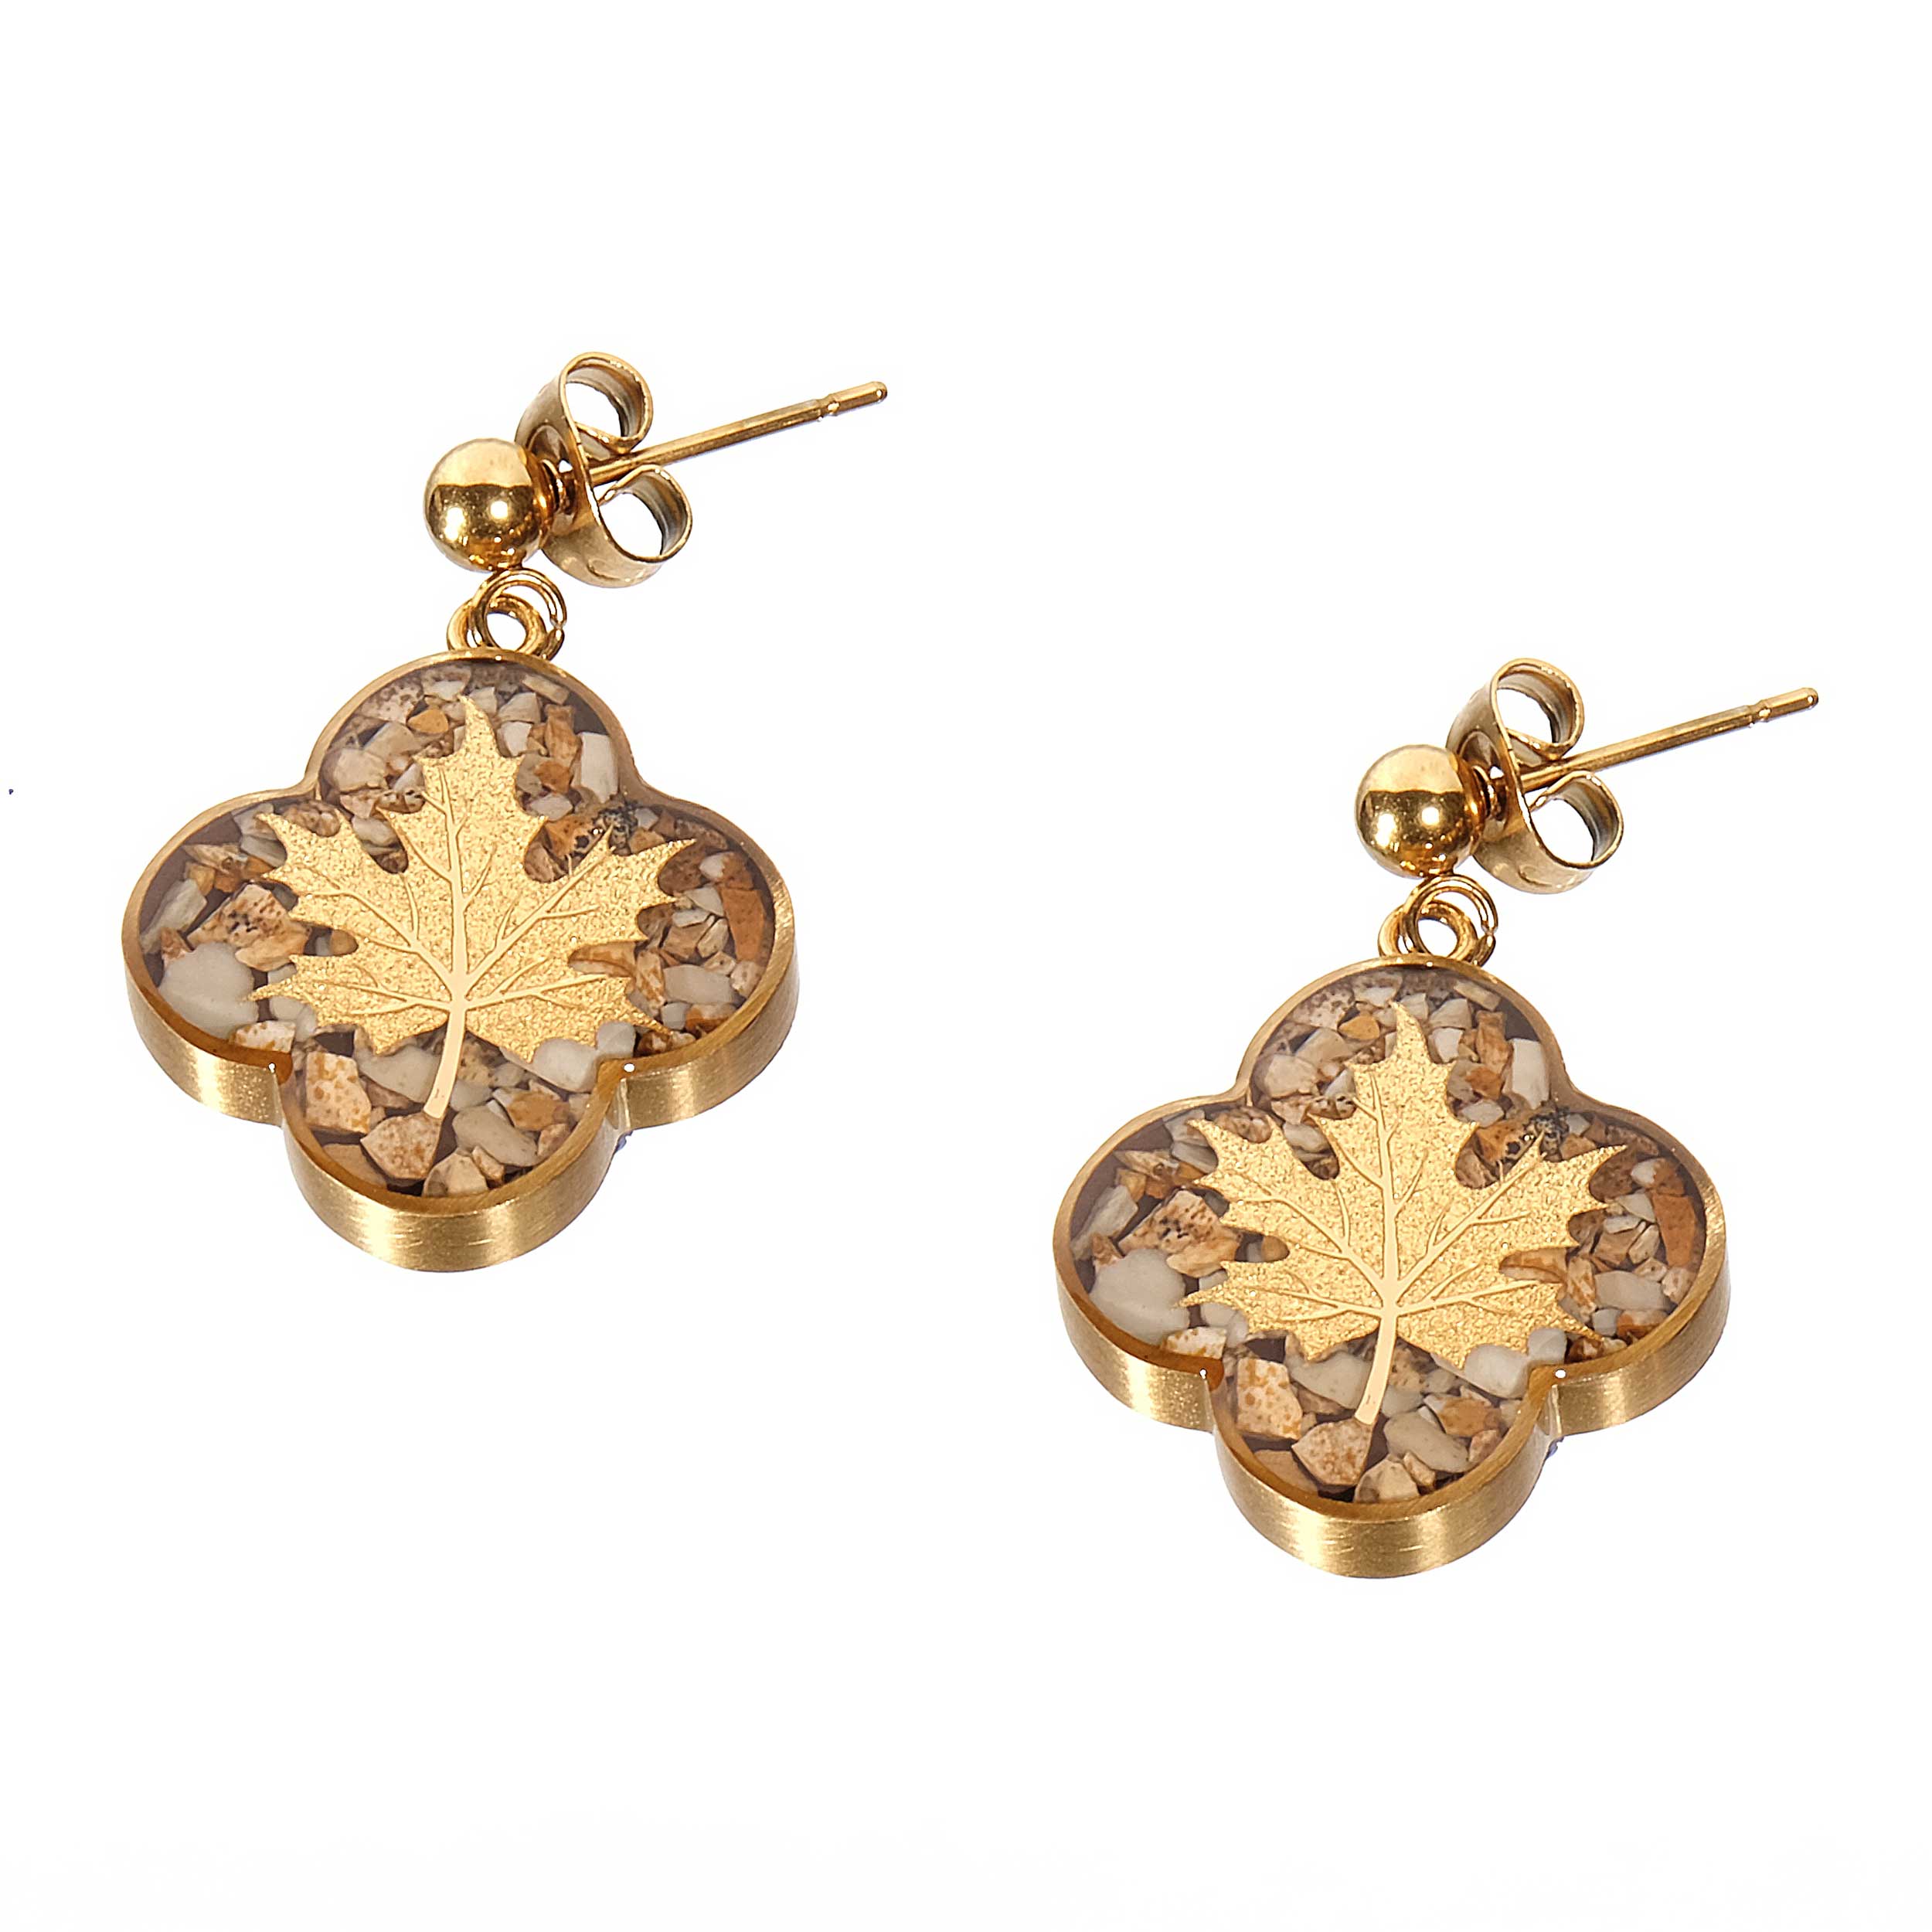 Brown jasper earrings and 24 carat gold leaf with autumn design